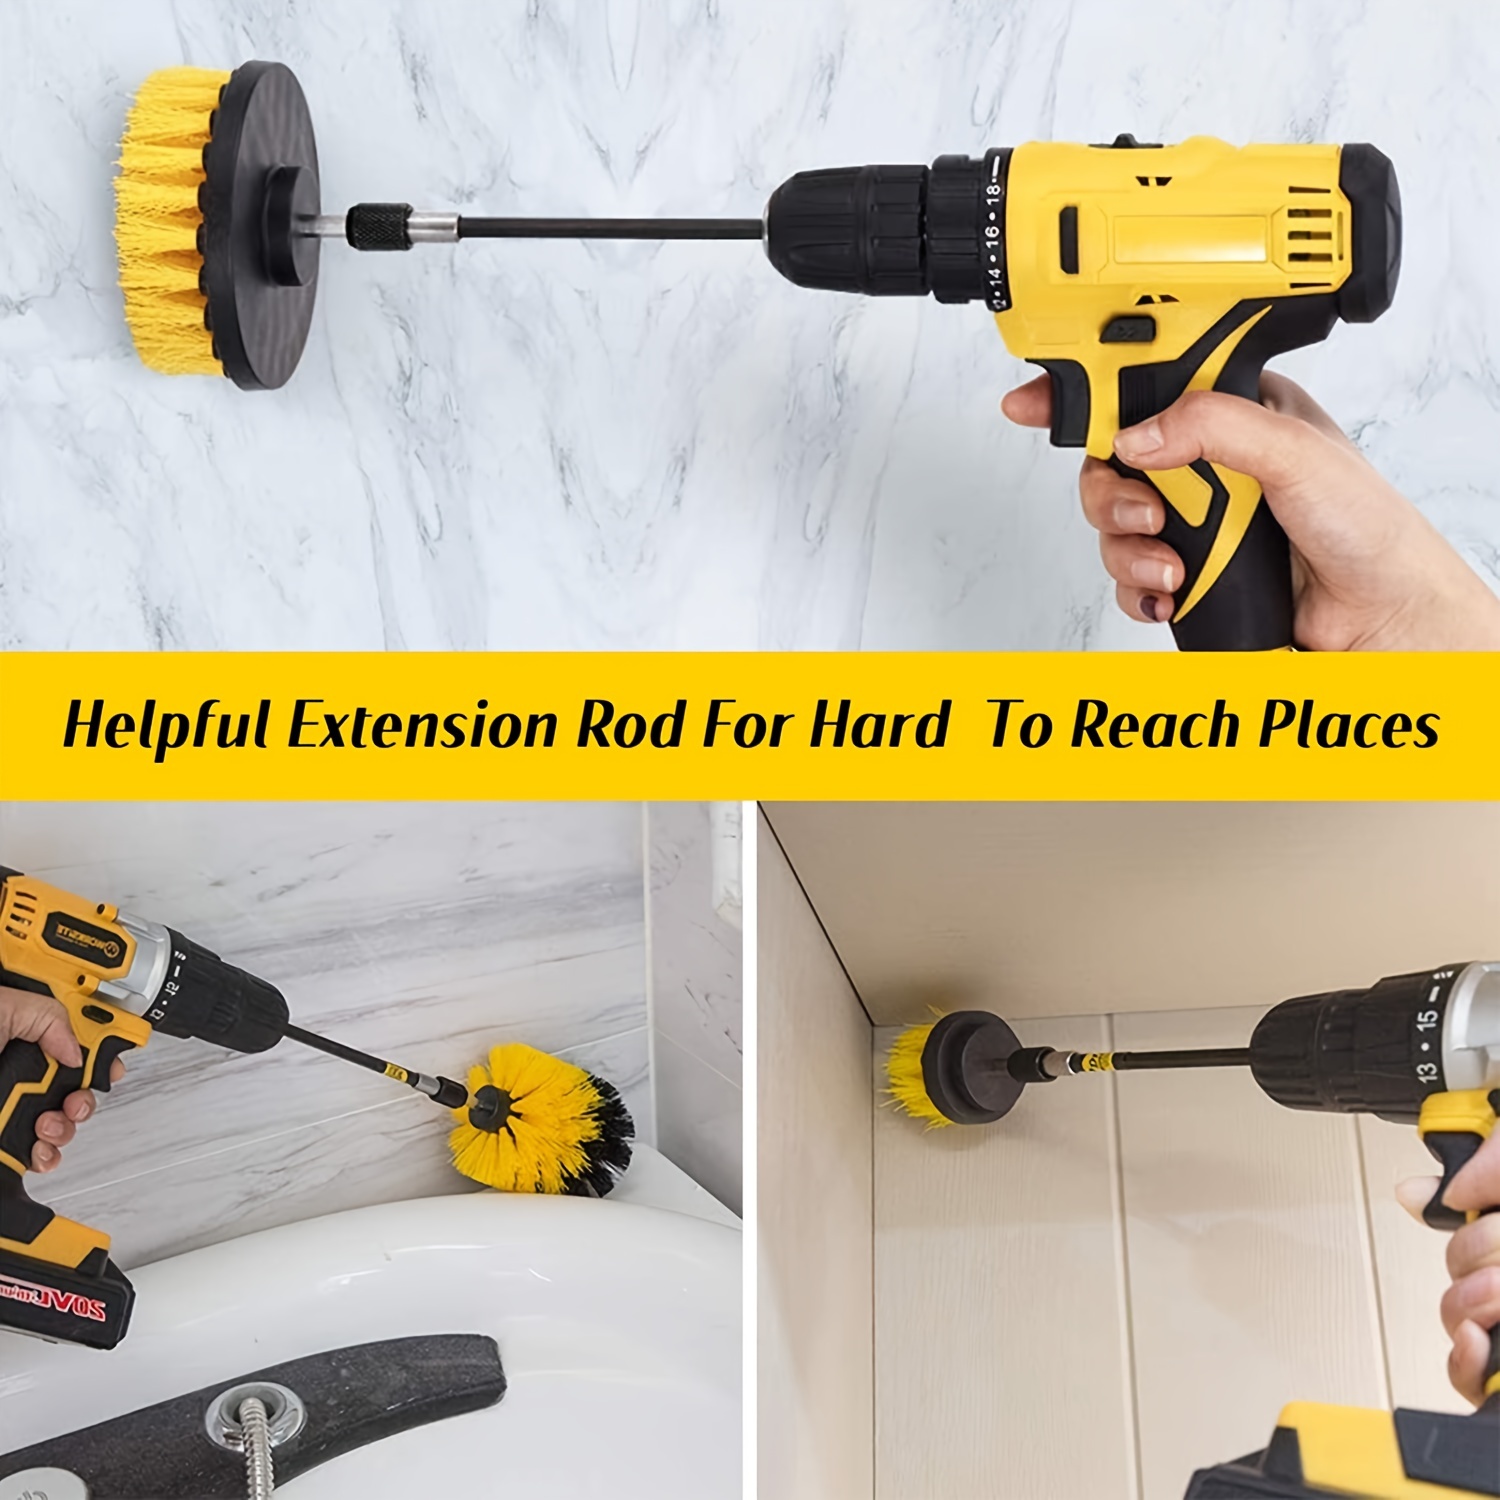 Tile and Grout Drill Brush Cordless Drill Power Scrubber 